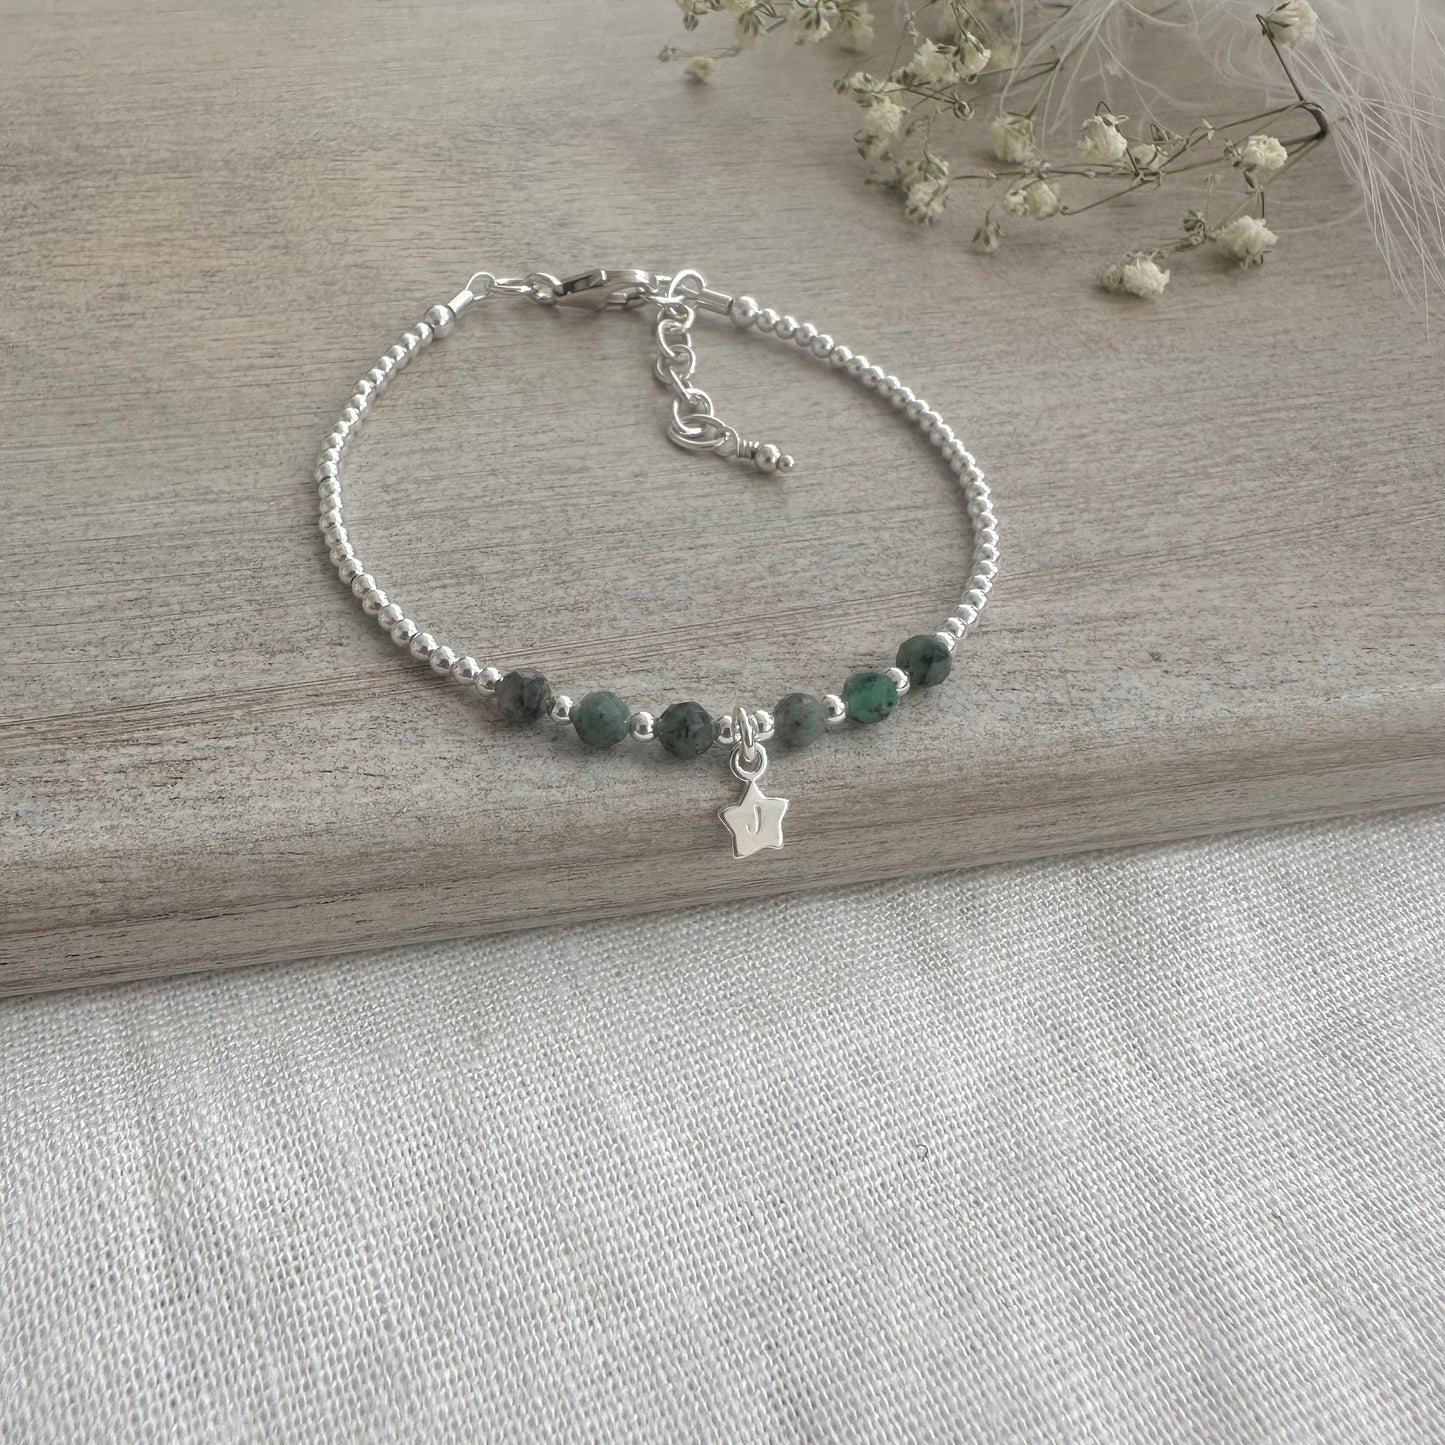 Personalised Emerald May Birthstone Bracelet with star charm, Dainty Jewellery in Sterling Silver